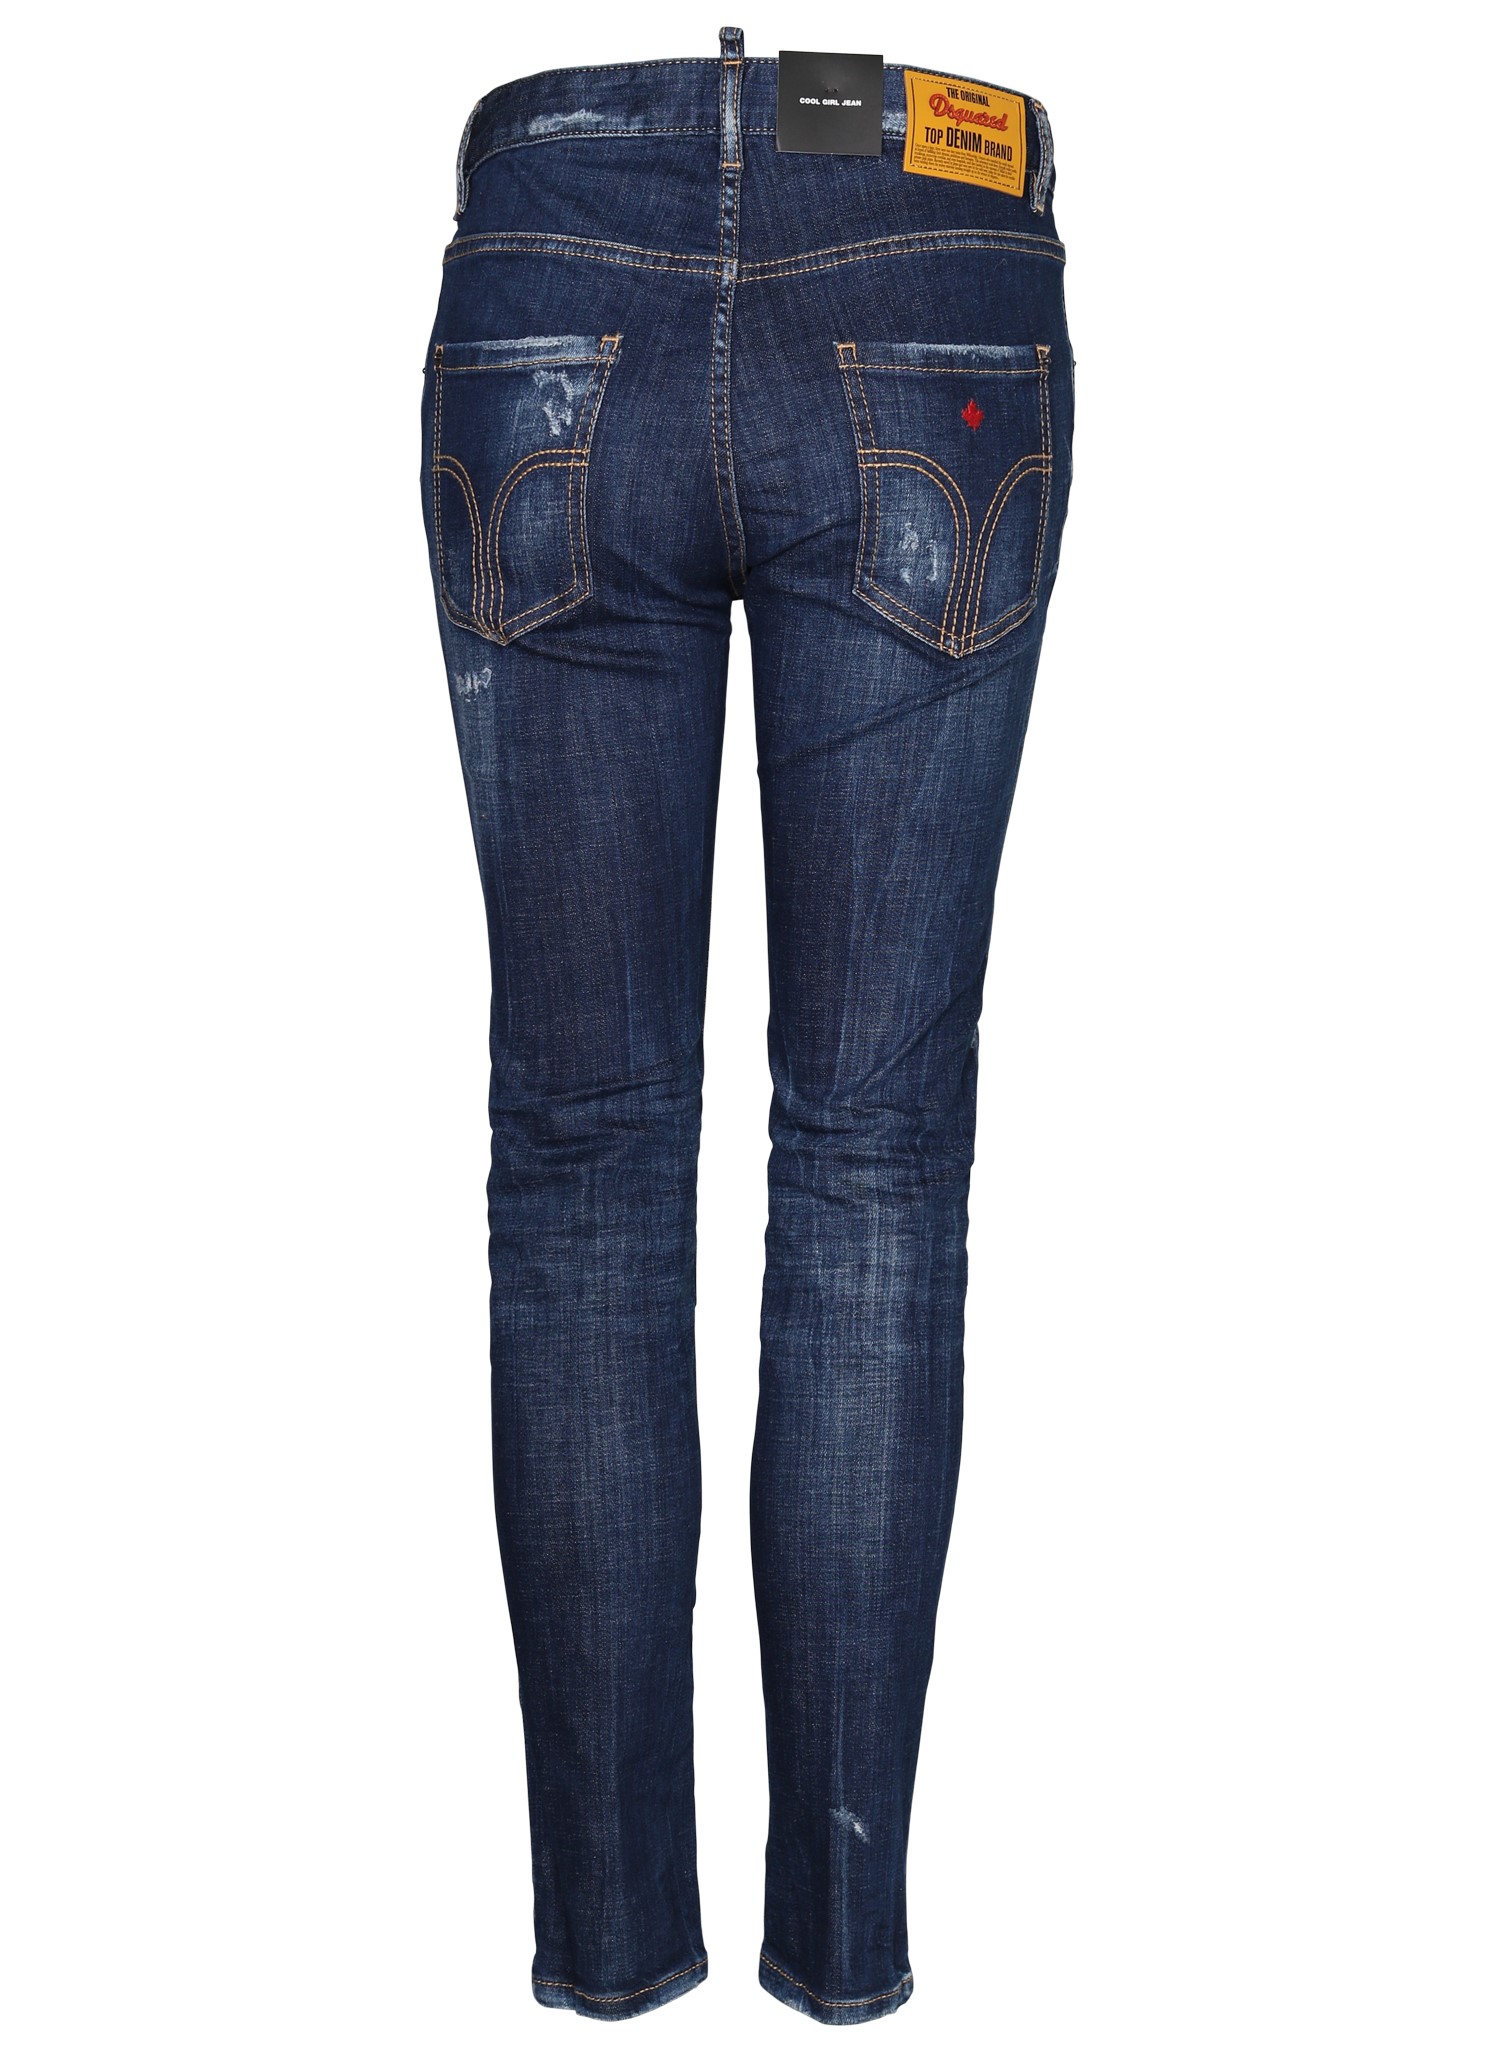 DSQUARED2 Cool Girl Jeans in Washed Dark Blue